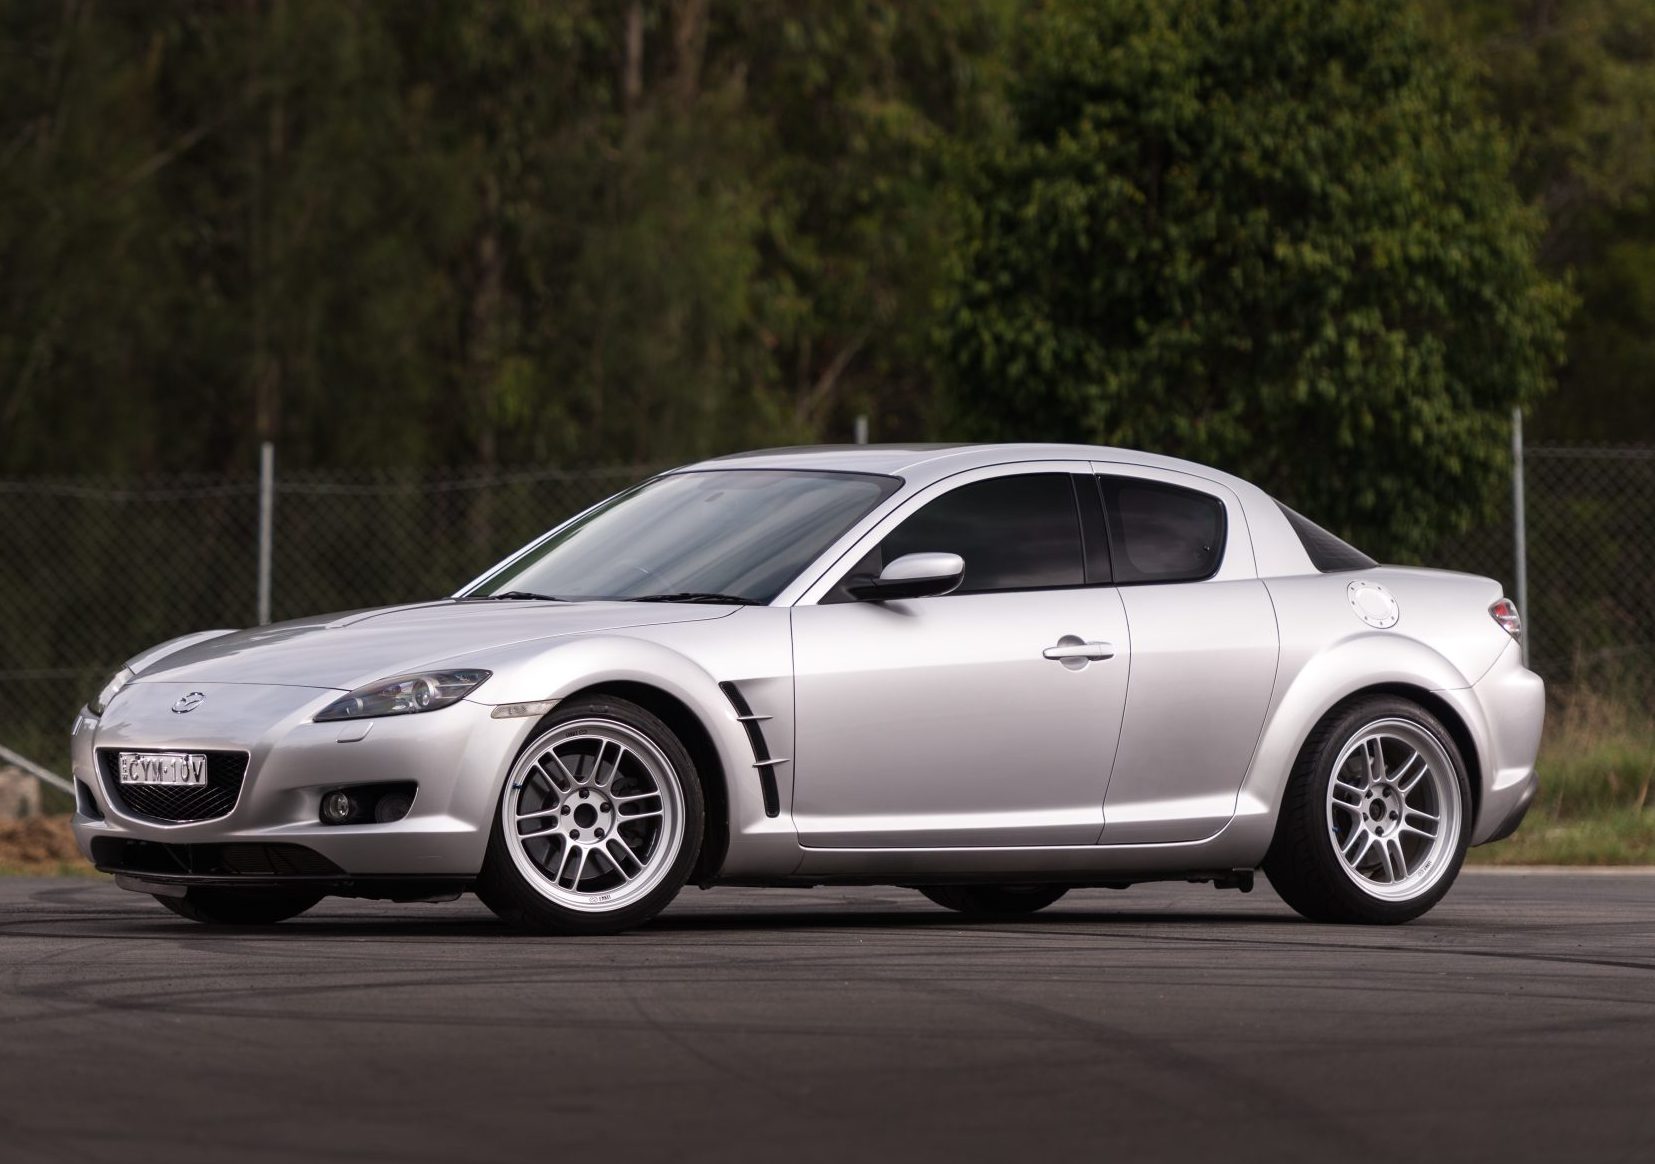 6.0-litre LS-swapped Mazda RX-8